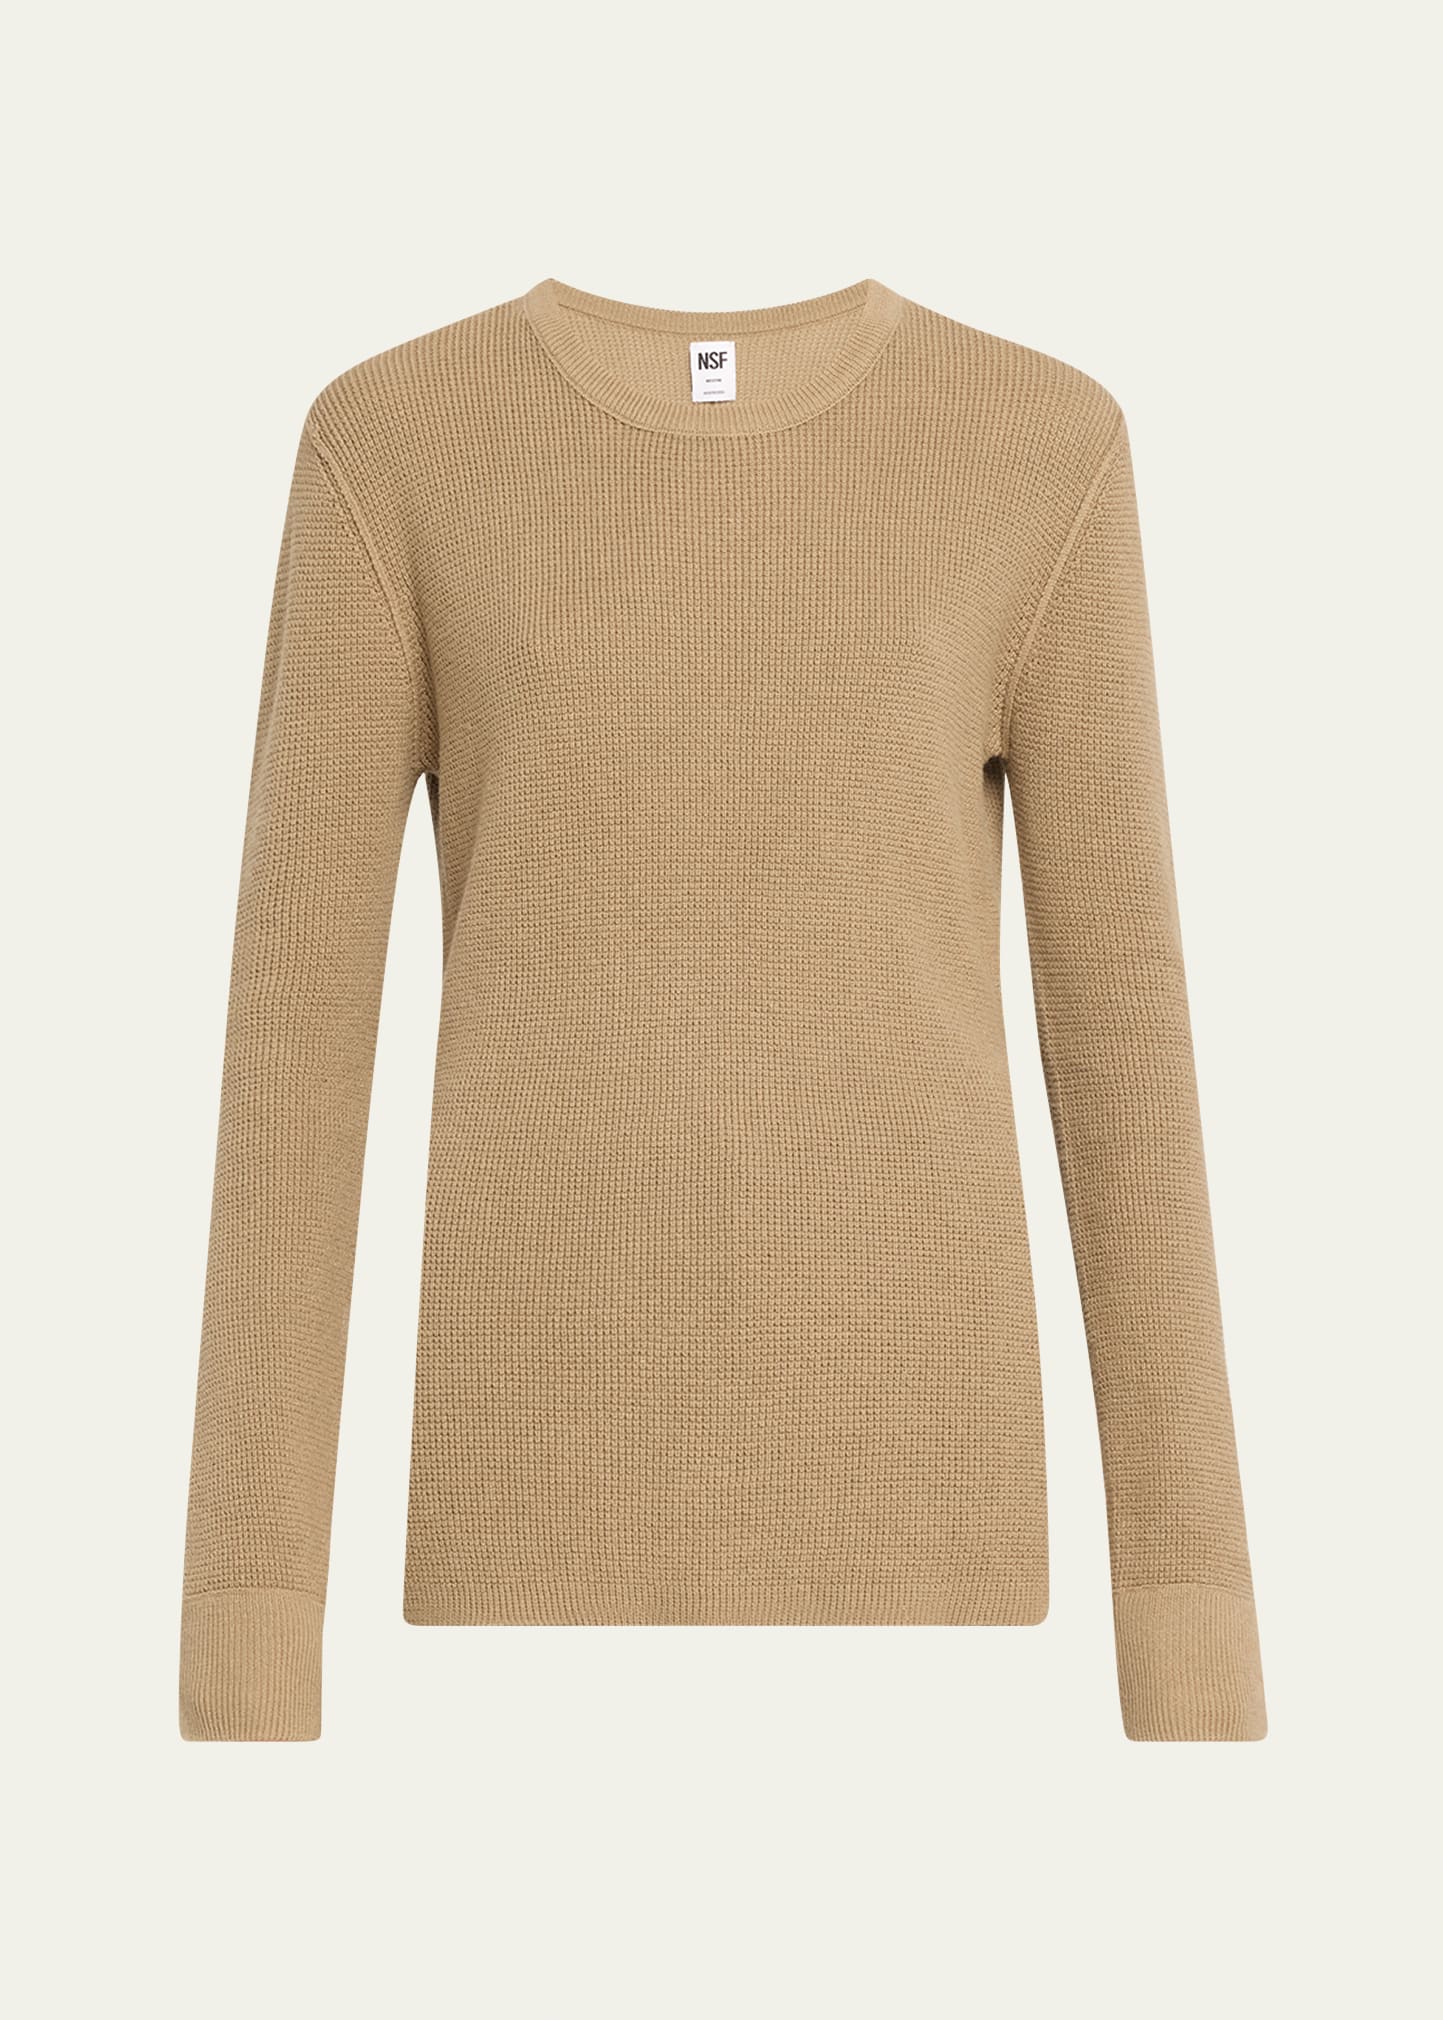 Nsf Clothing Taj Cotton Cashmere Thermal Sweater In Olive